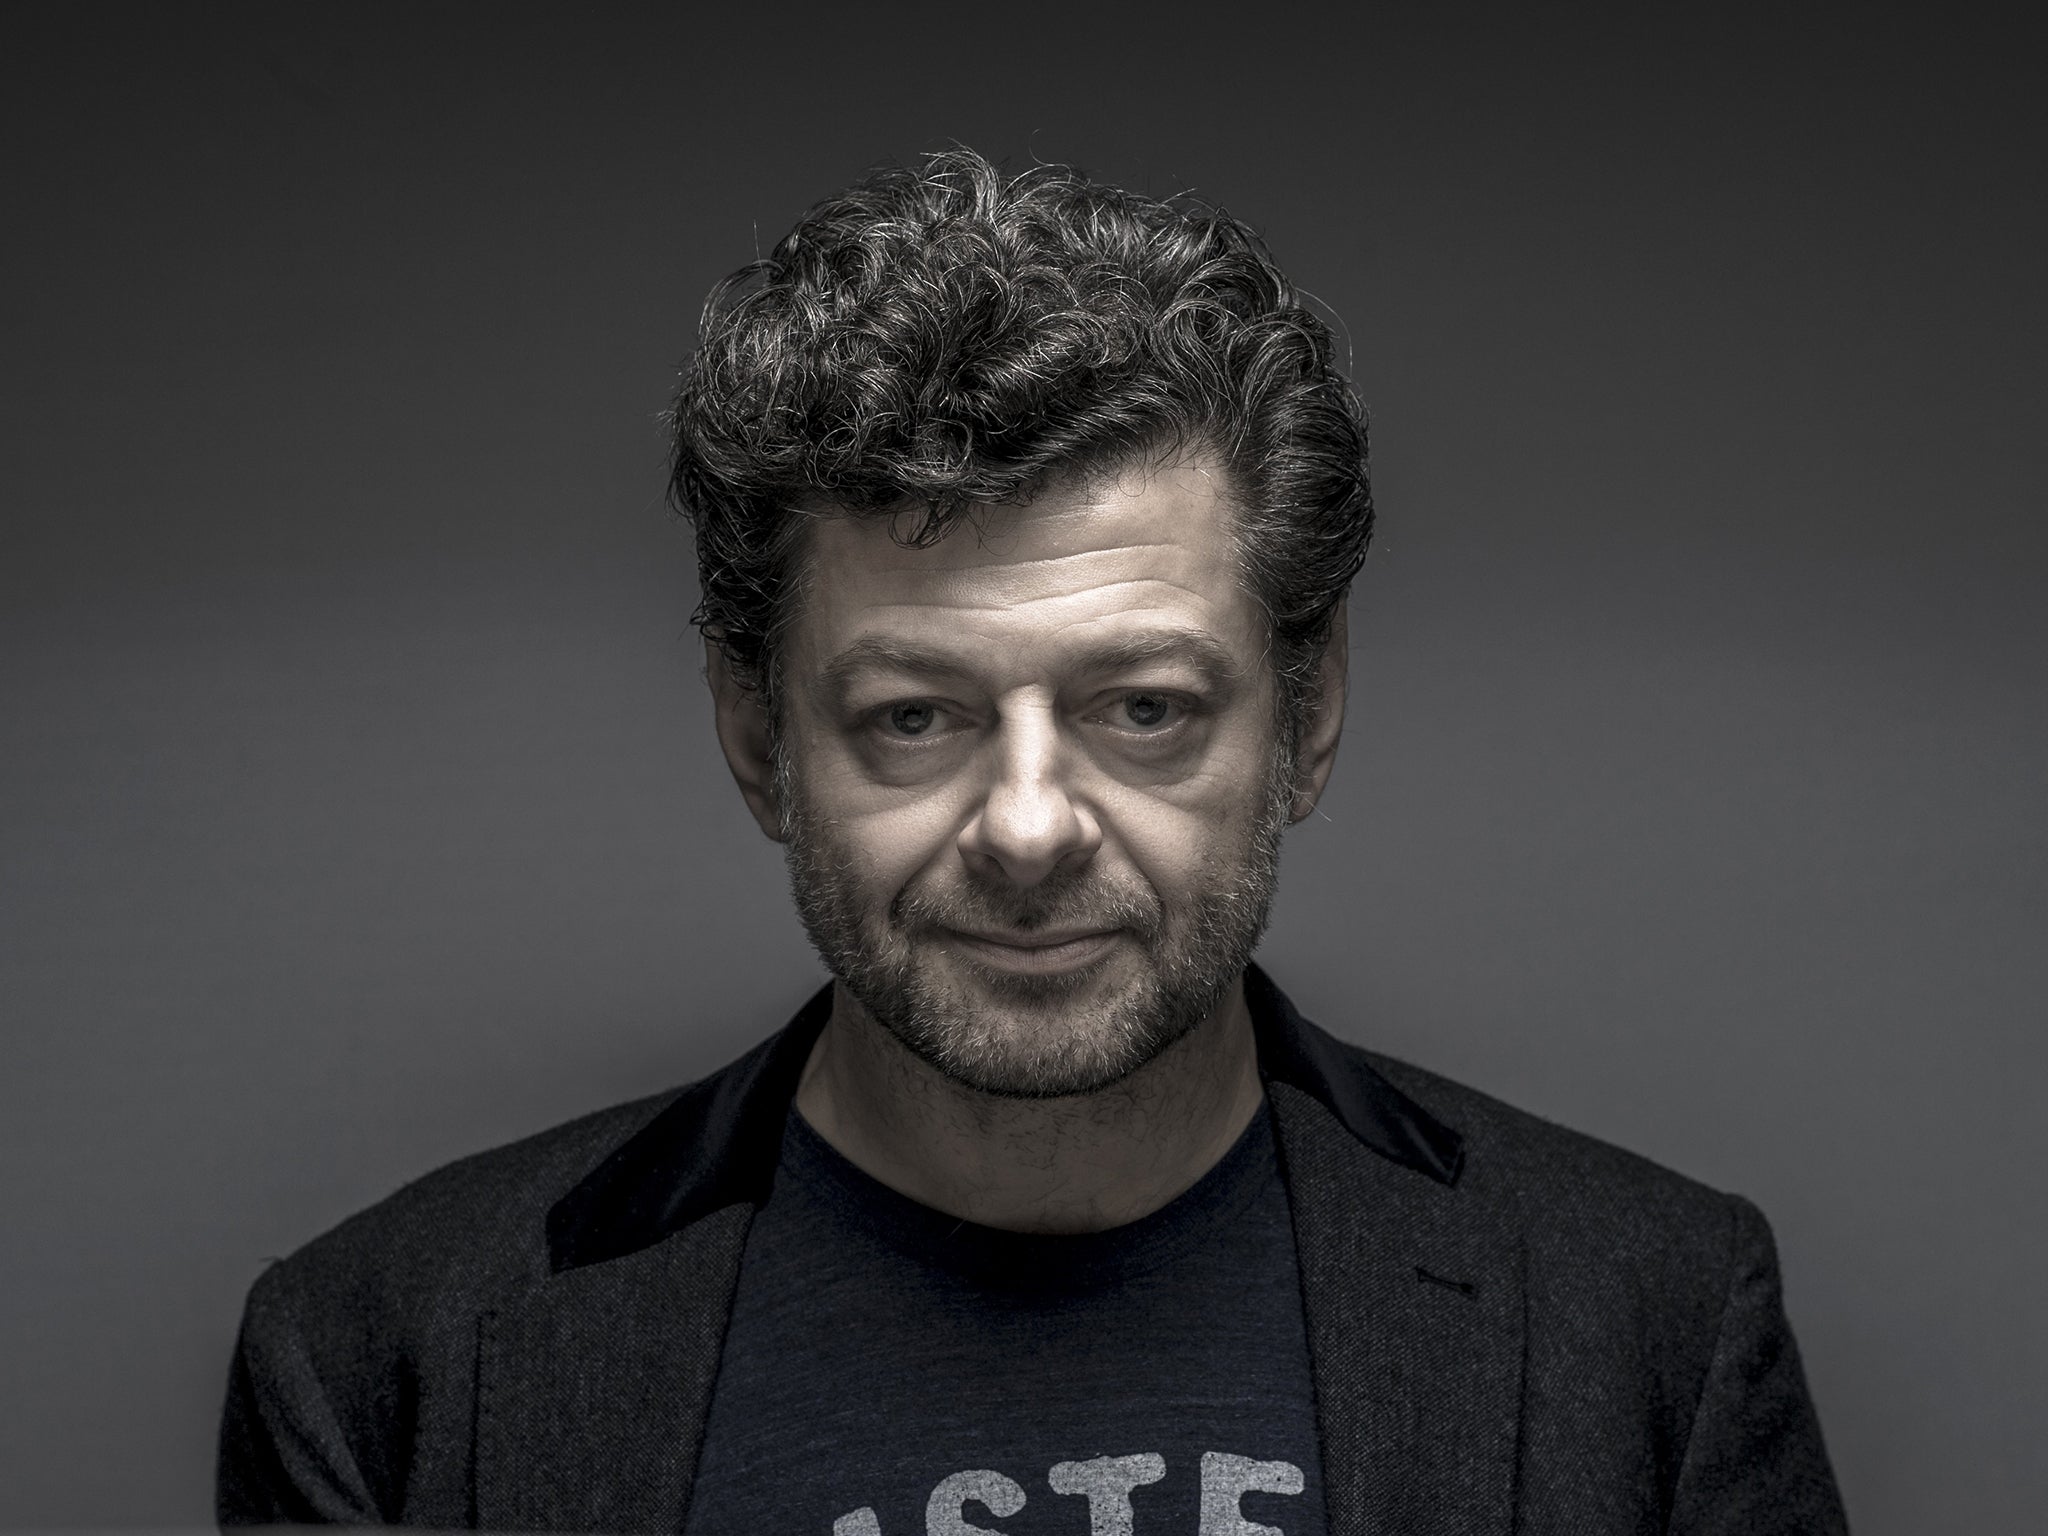 Andy Serkis has become the godfather of motion capture